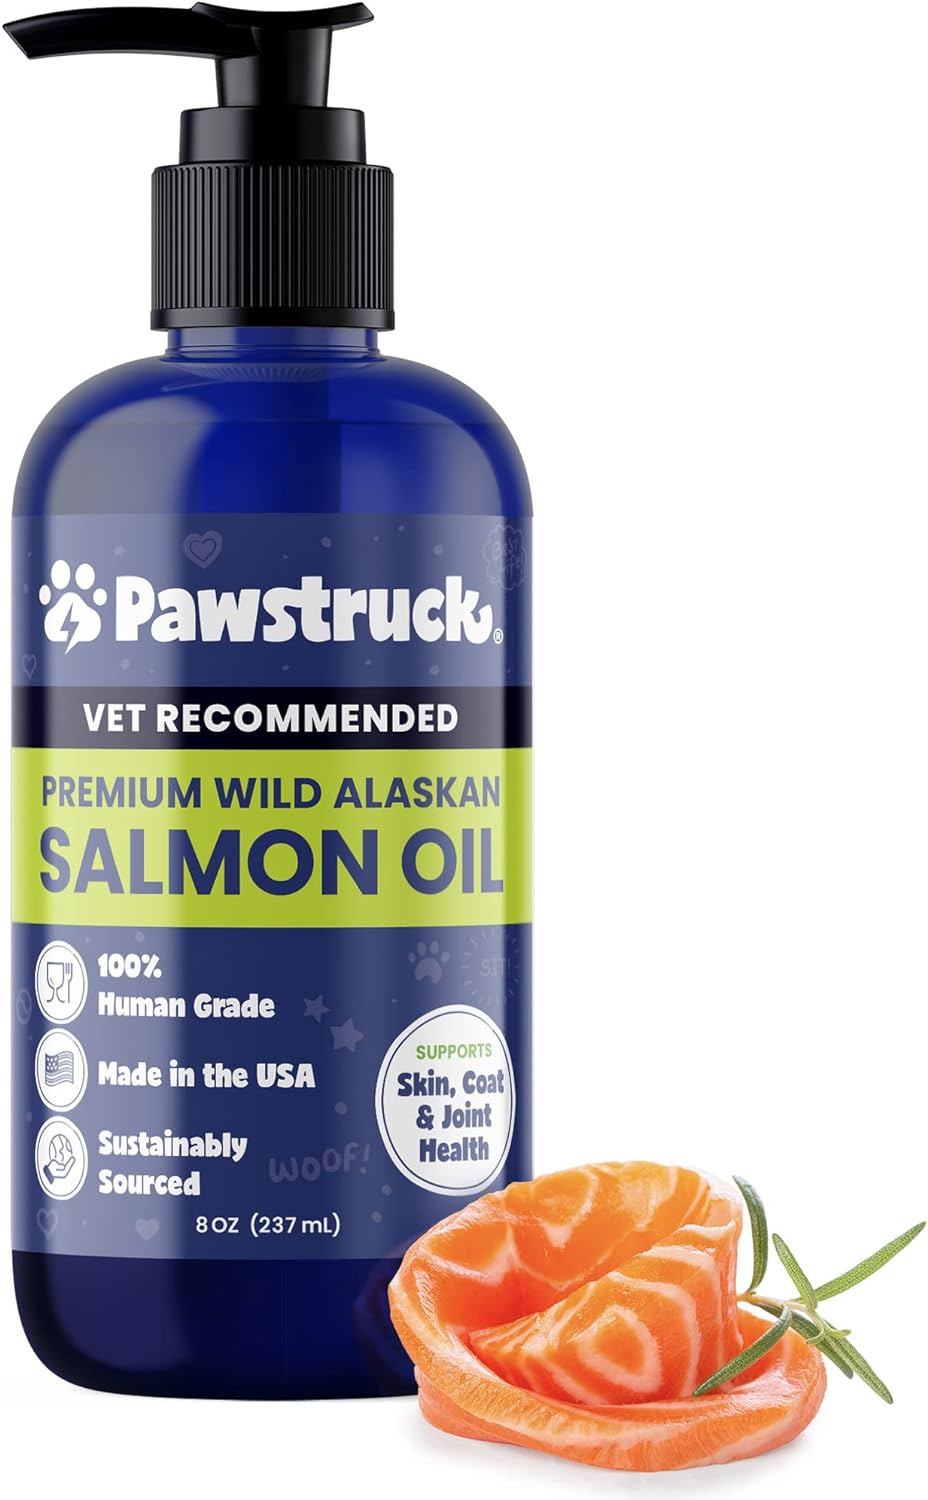 Pure Human-Grade Wild Alaskan Salmon Oil for Dogs & Cats - Vet Recommended Omega 3 & 6 Extra Strength Supplement Food Topper with EPA DHA Fatty Acids for Skin, Coat, Joint, and Immune Support